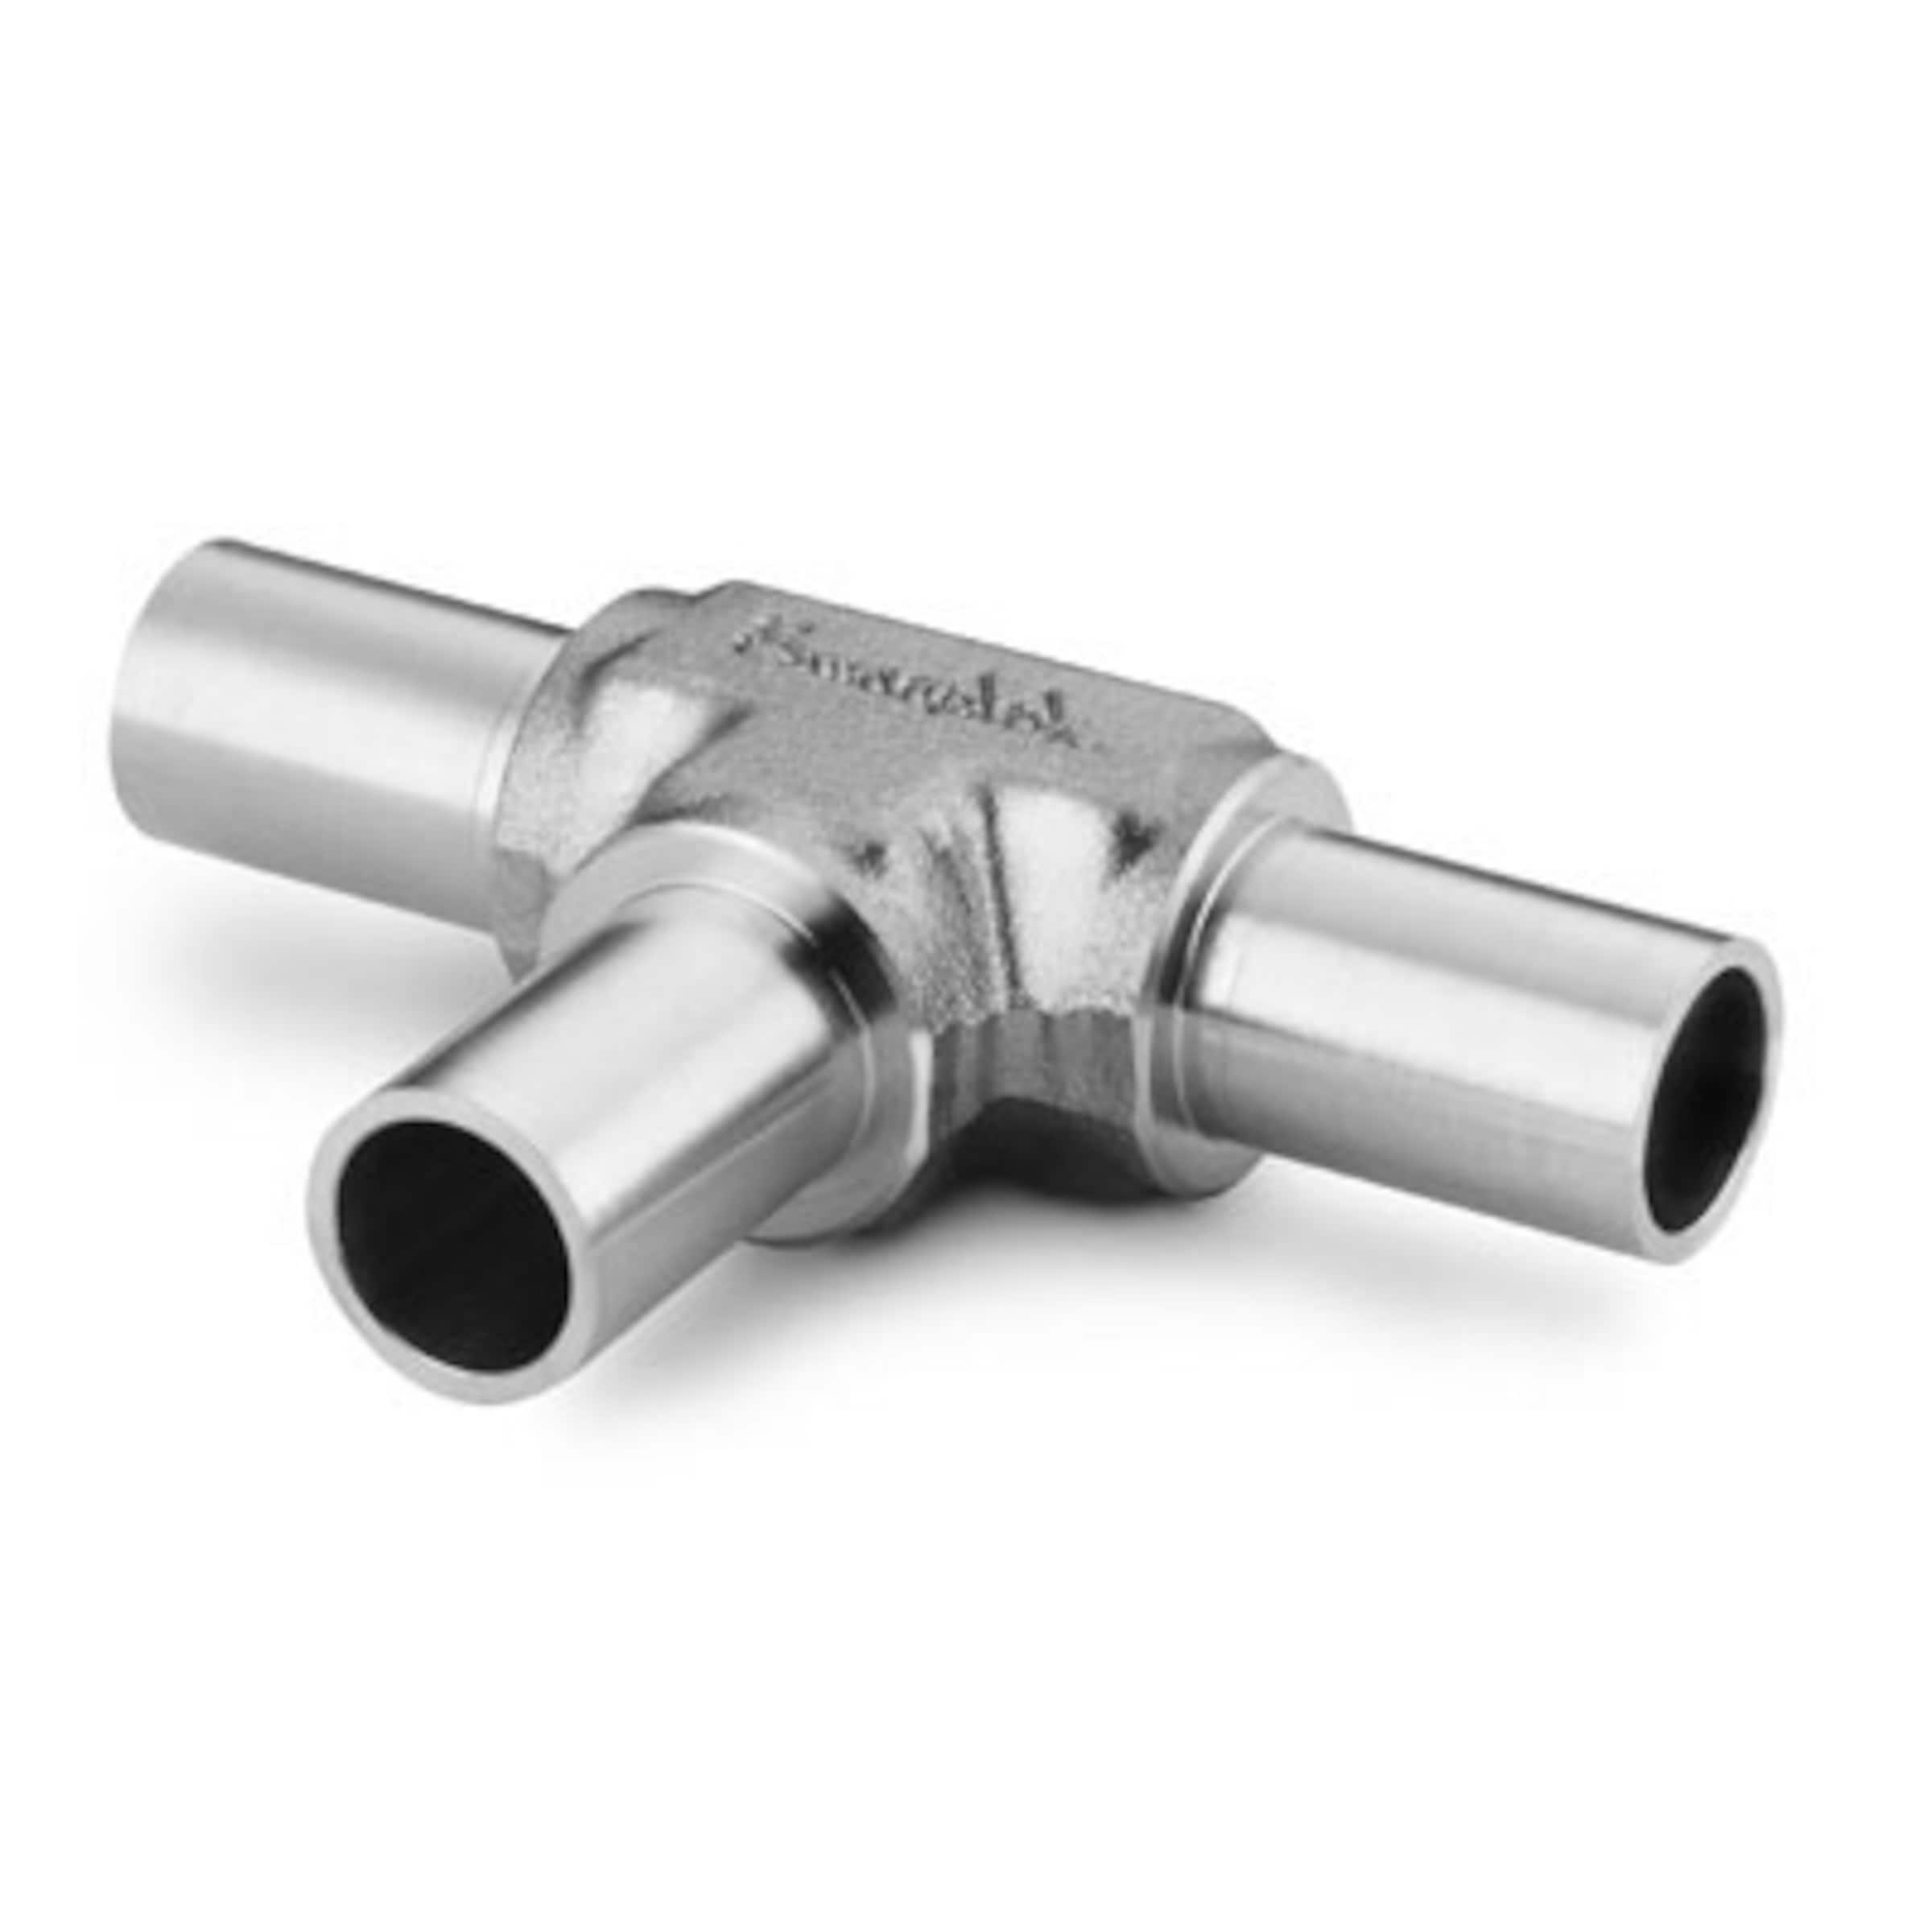 Stainless Steel Tube Fitting, Union 1/4 inch. or two way tube